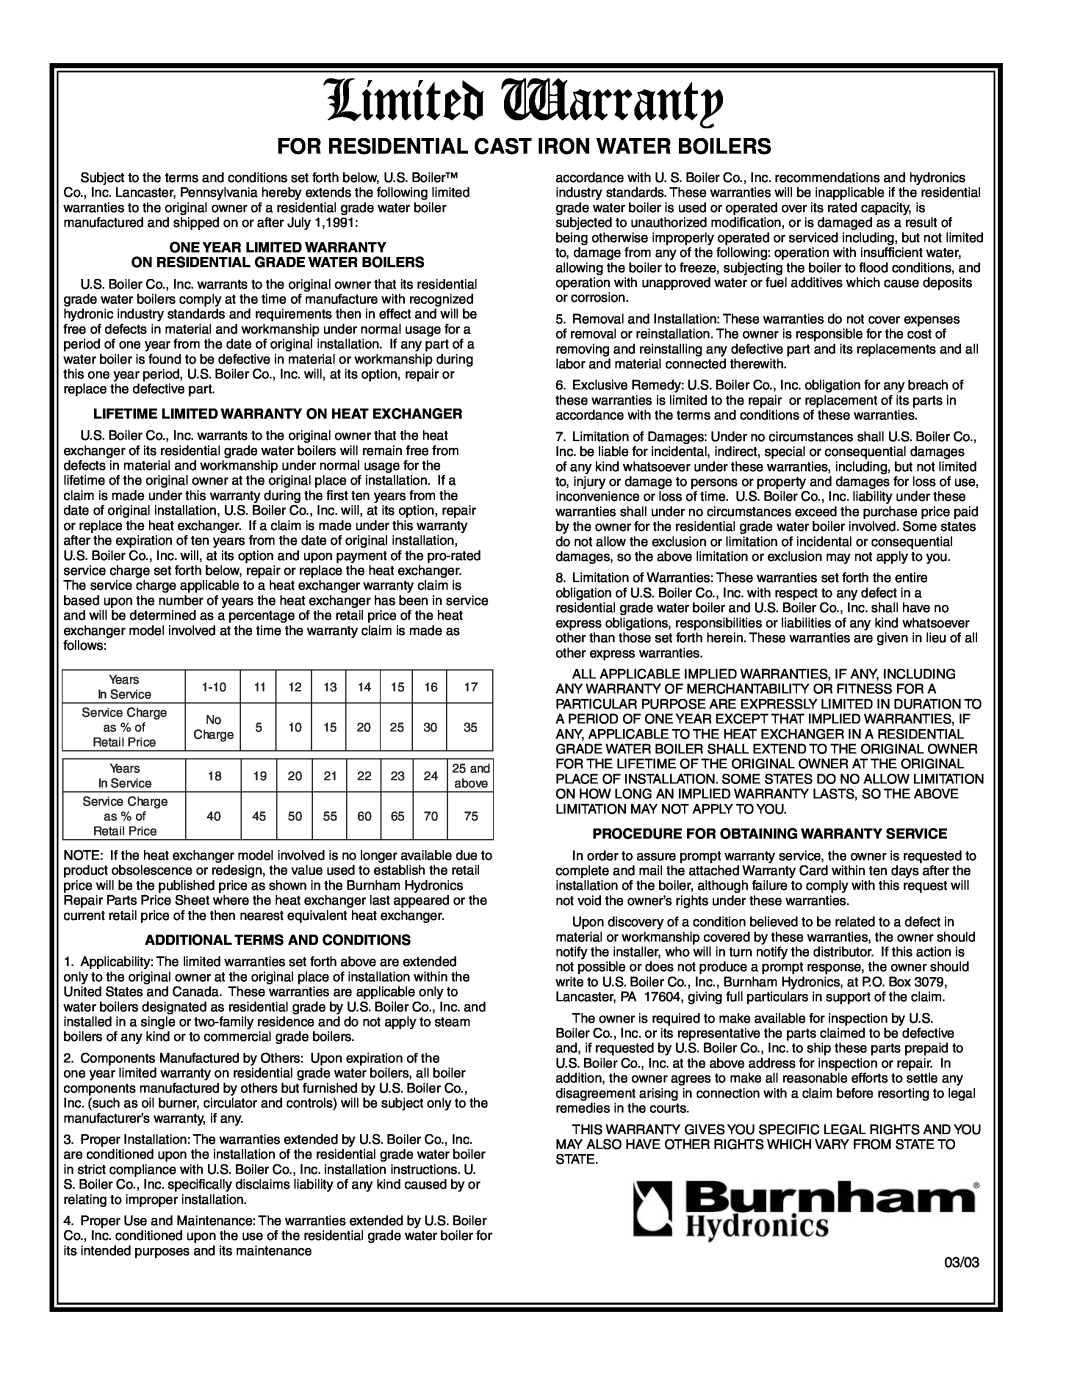 Burnham E4 manual For Residential Cast Iron Water Boilers, Lifetime Limited Warranty On Heat Exchanger, 03/03 